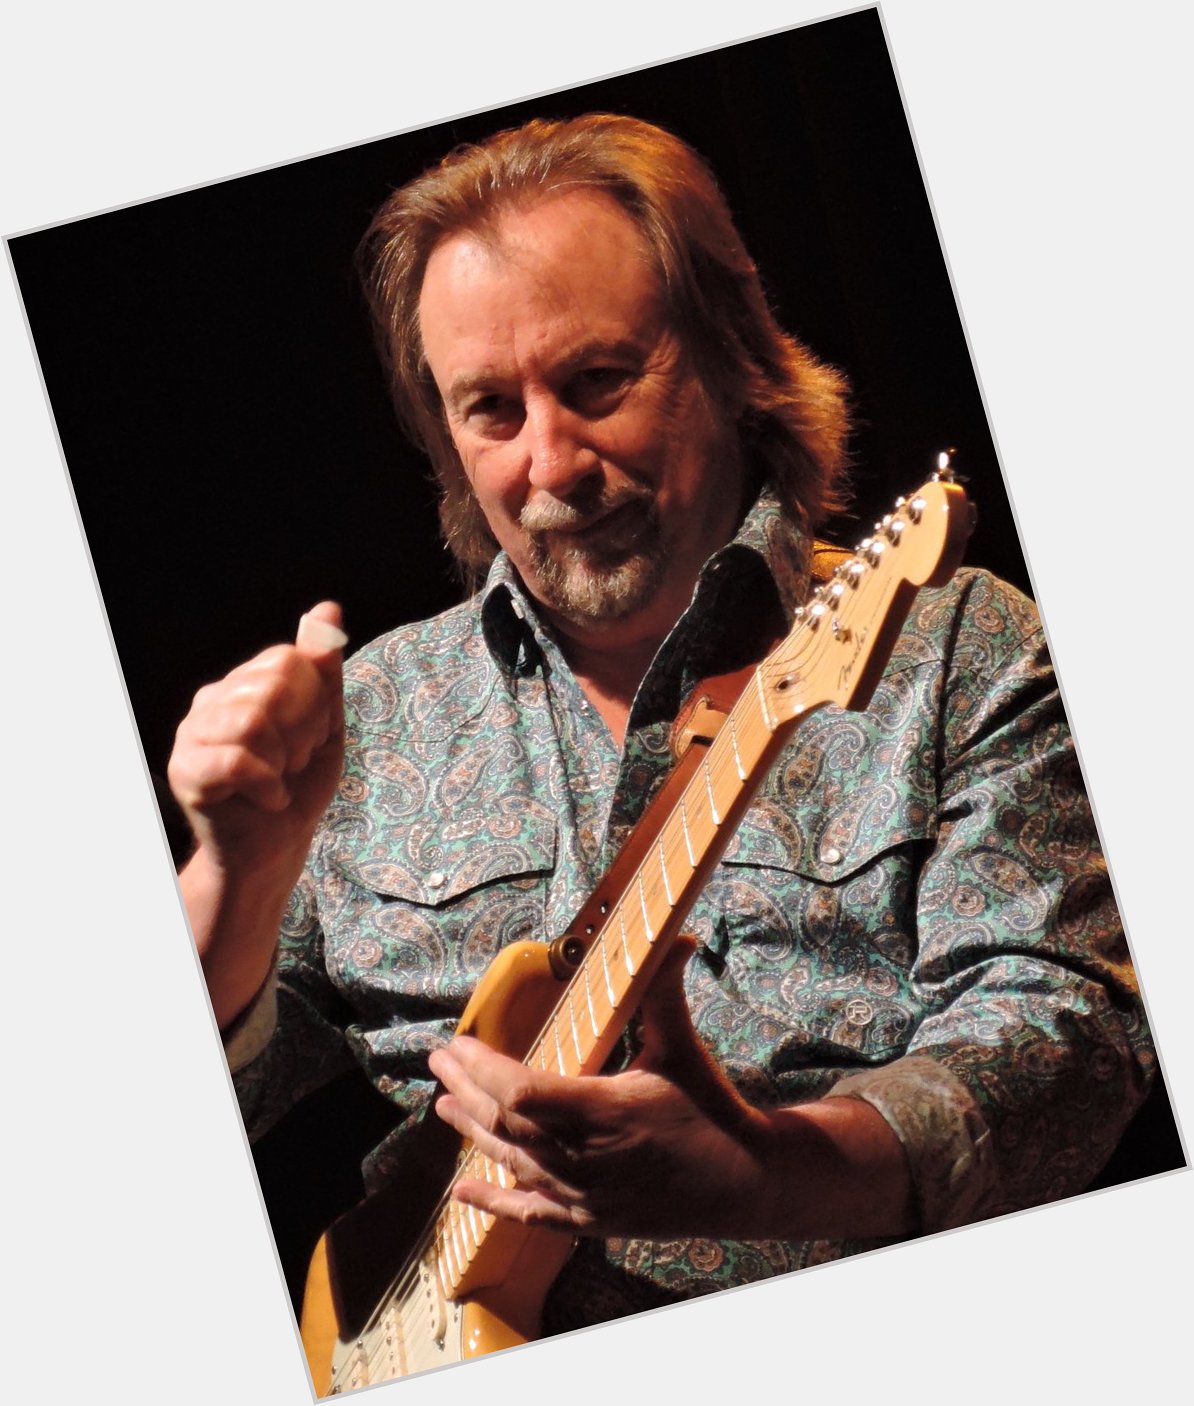 A Big BOSS Happy Birthday to Jim Messina today from all of us here at The Boss! 